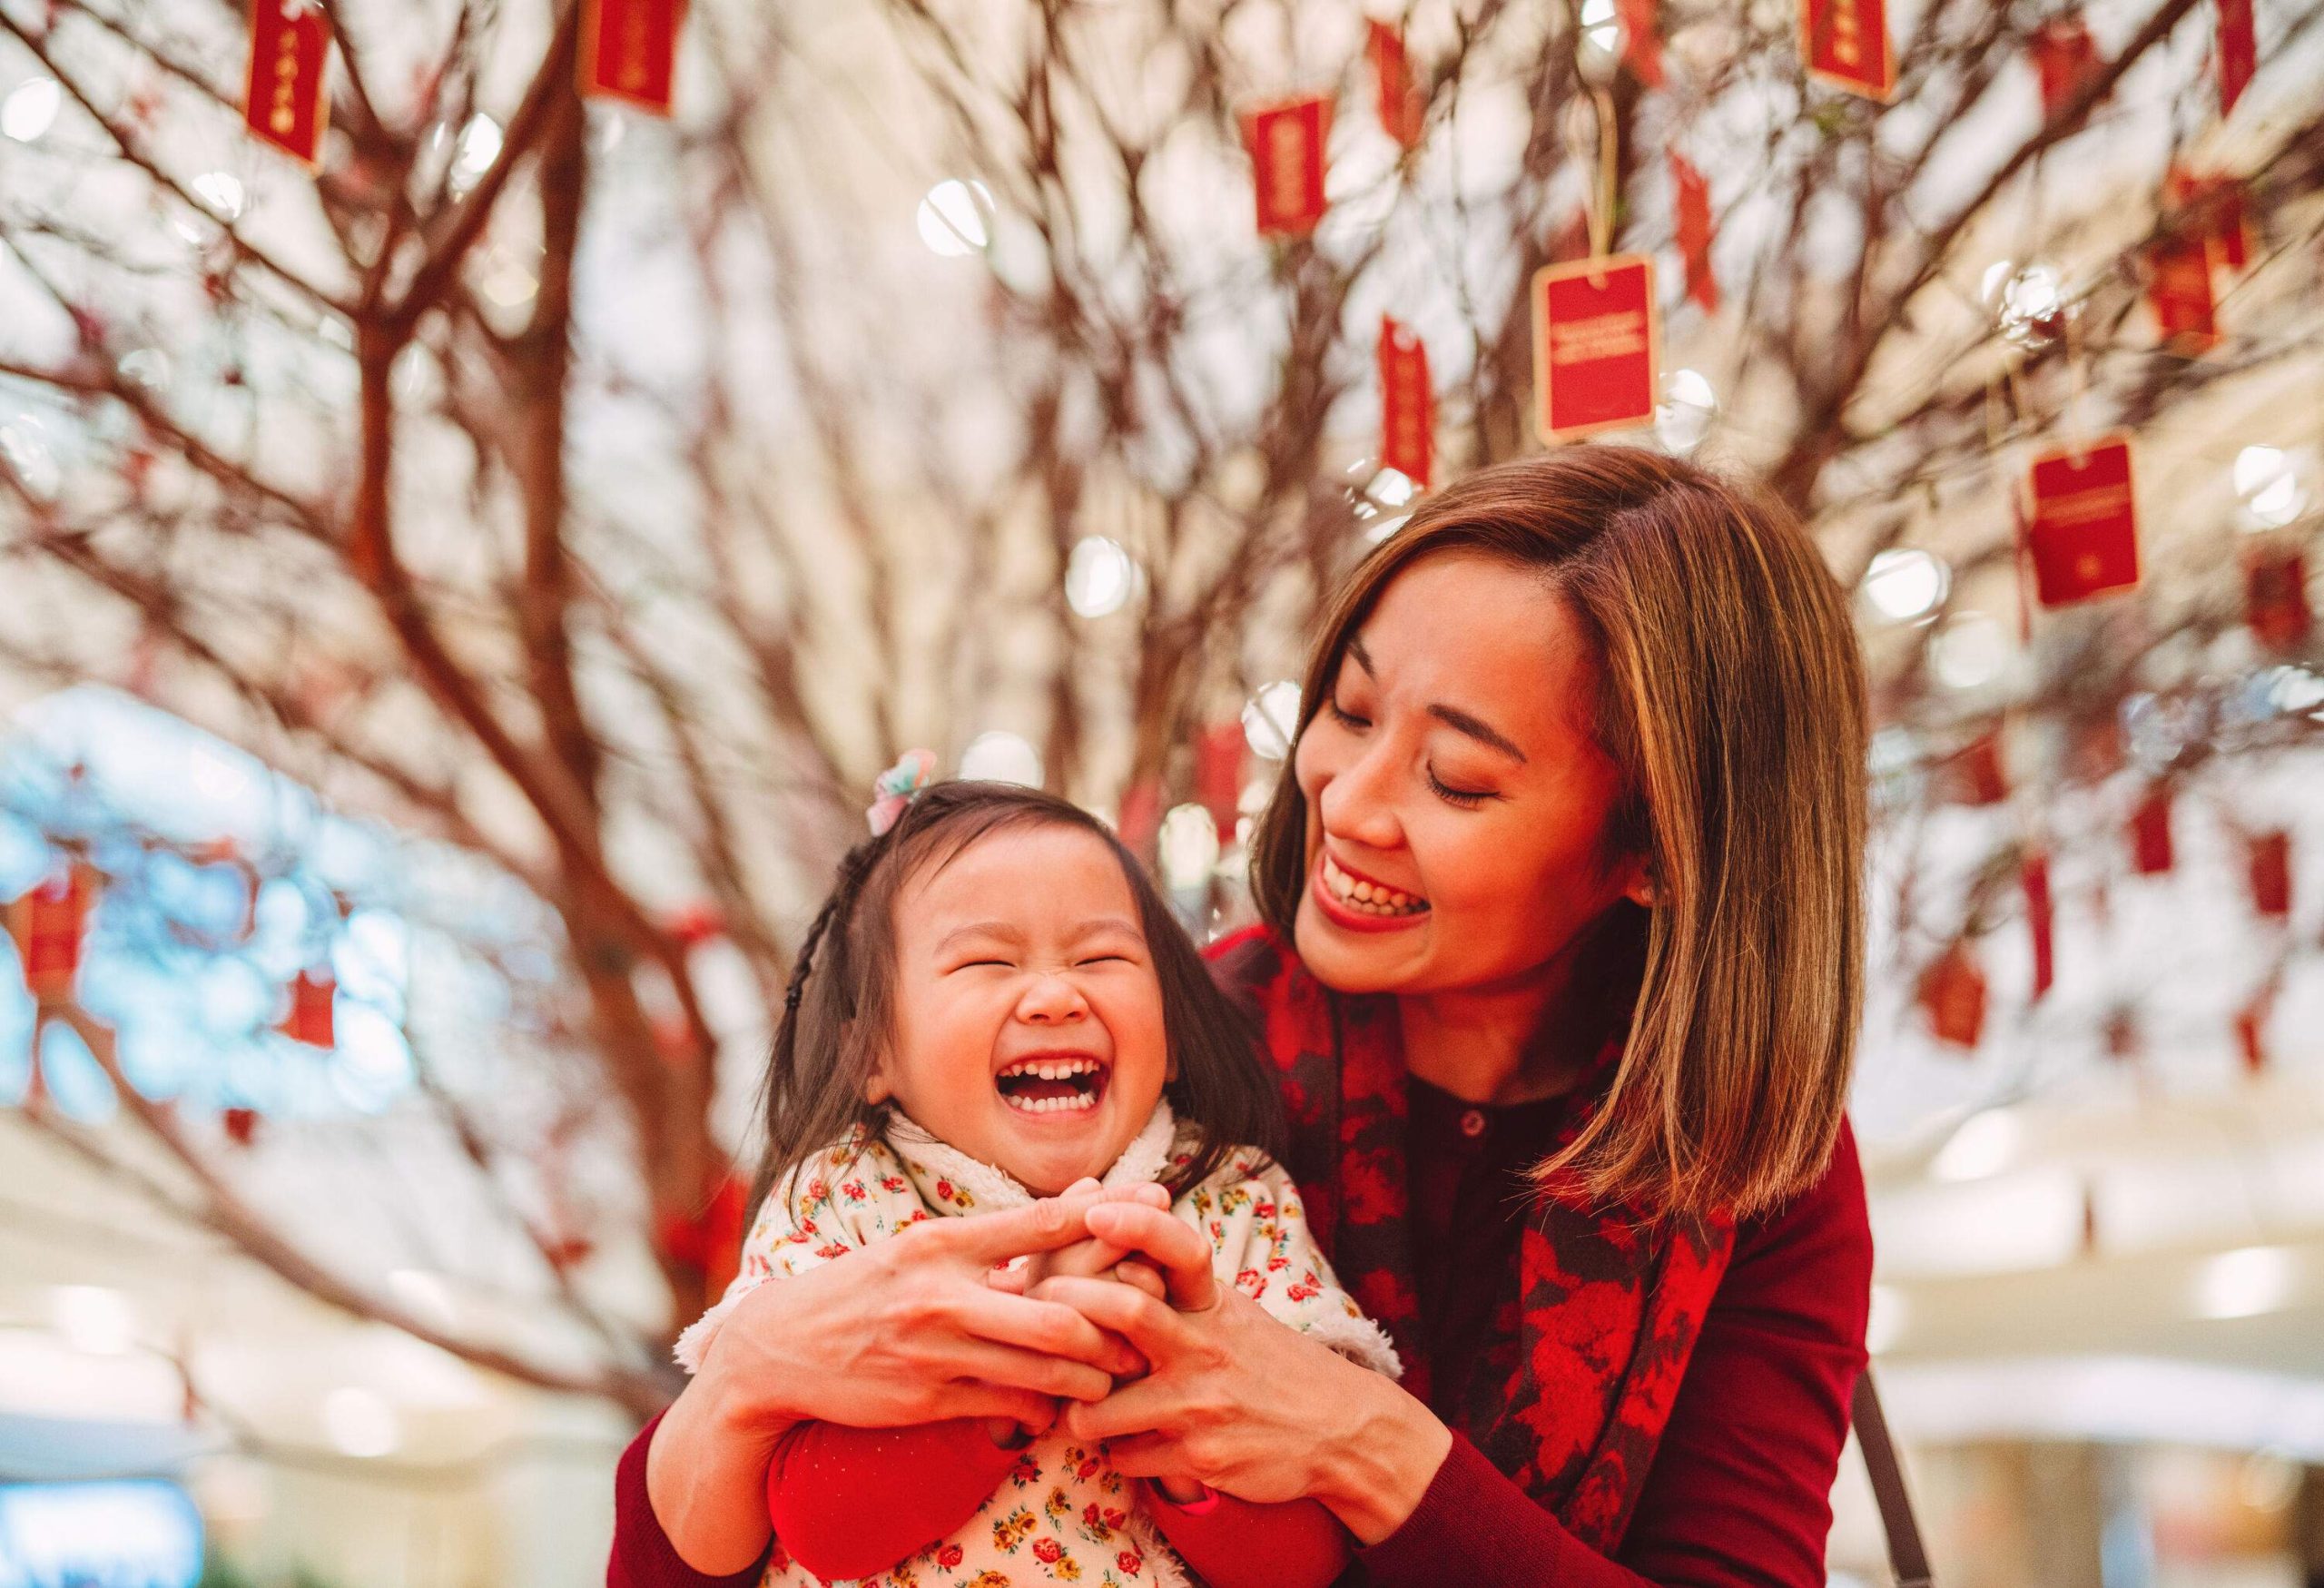 Mother making kung hei fat choy hand gesture with her lovely daughter joyfully in front of the peach blossom tree in Chinese New Year